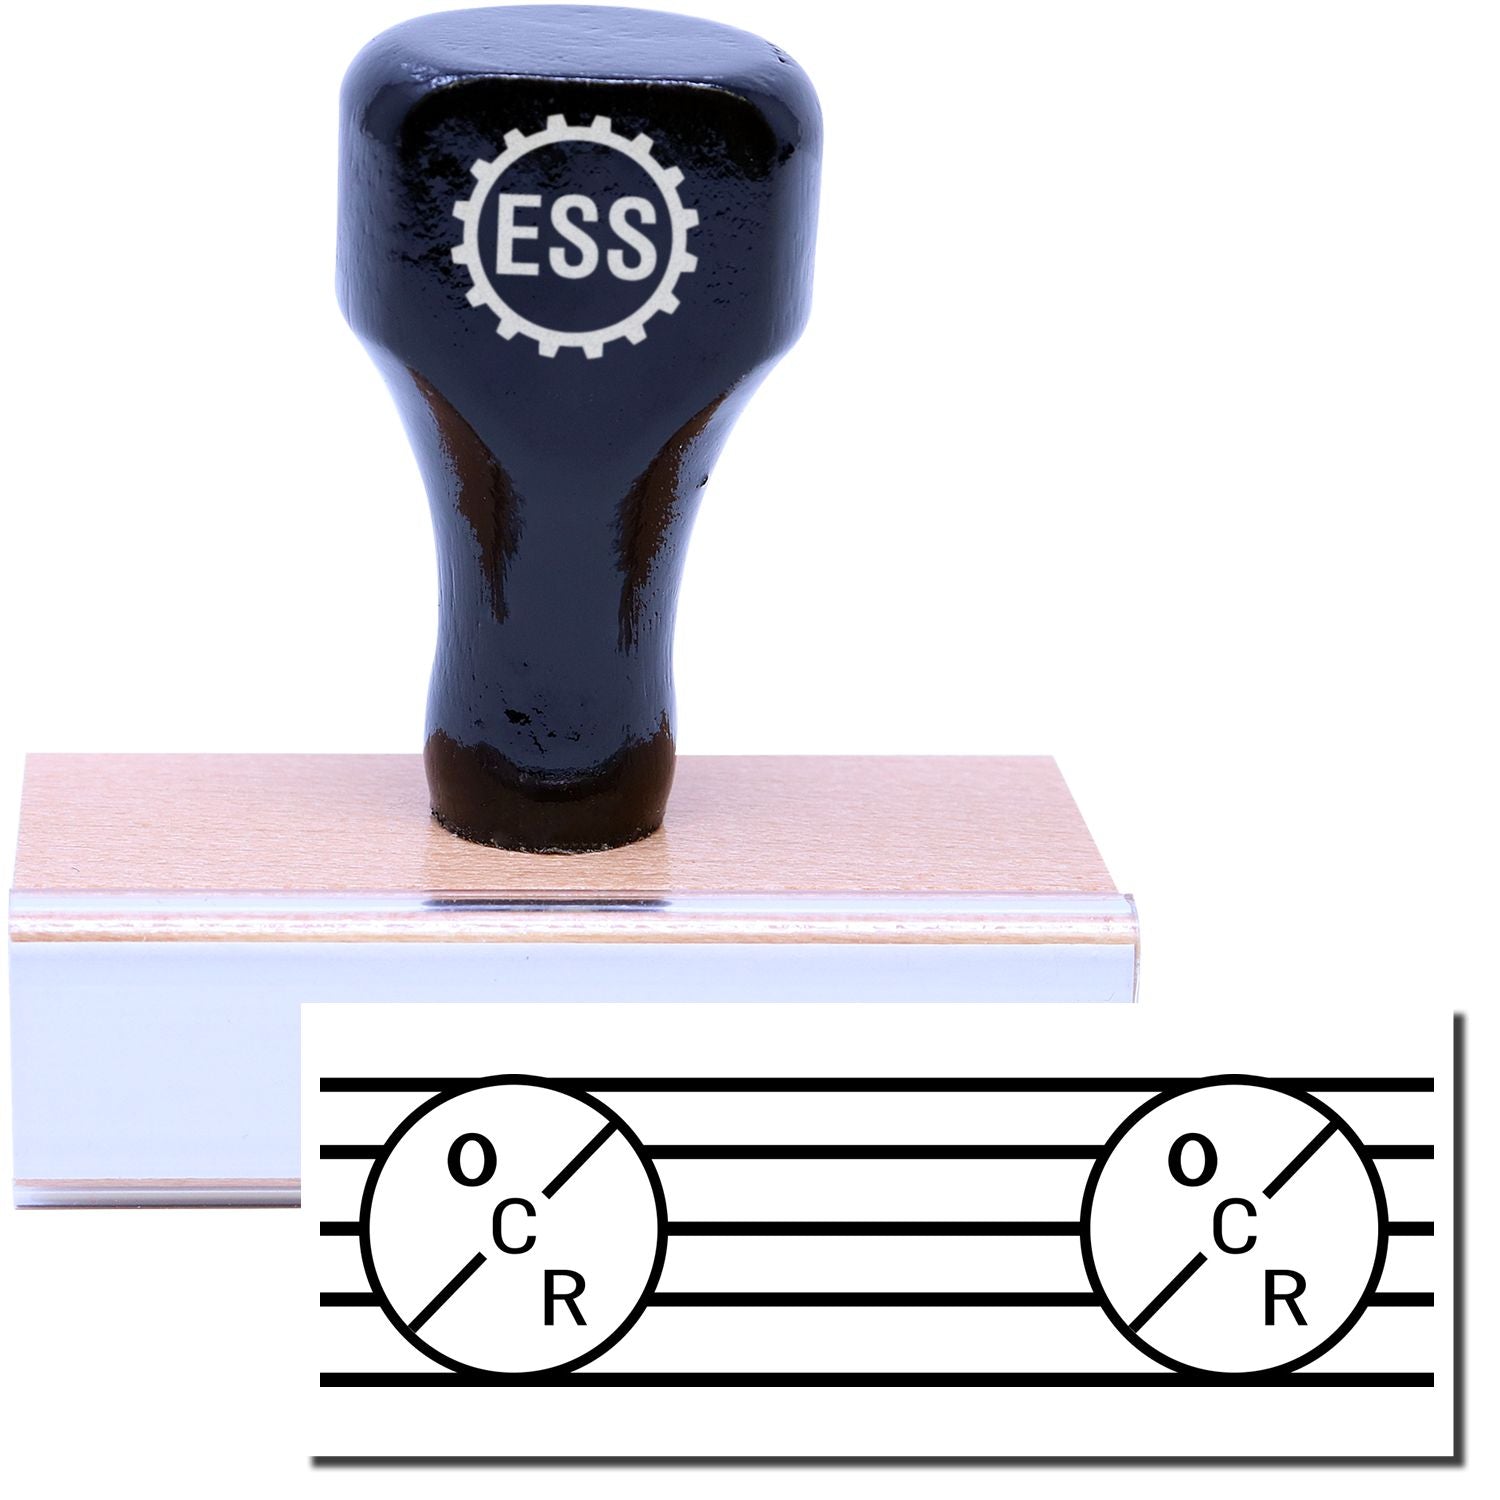 A stock office rubber stamp with a stamped image showing how the text "OCR" in a large font appears twice with extra design elements like lines and circles is displayed after stamping.